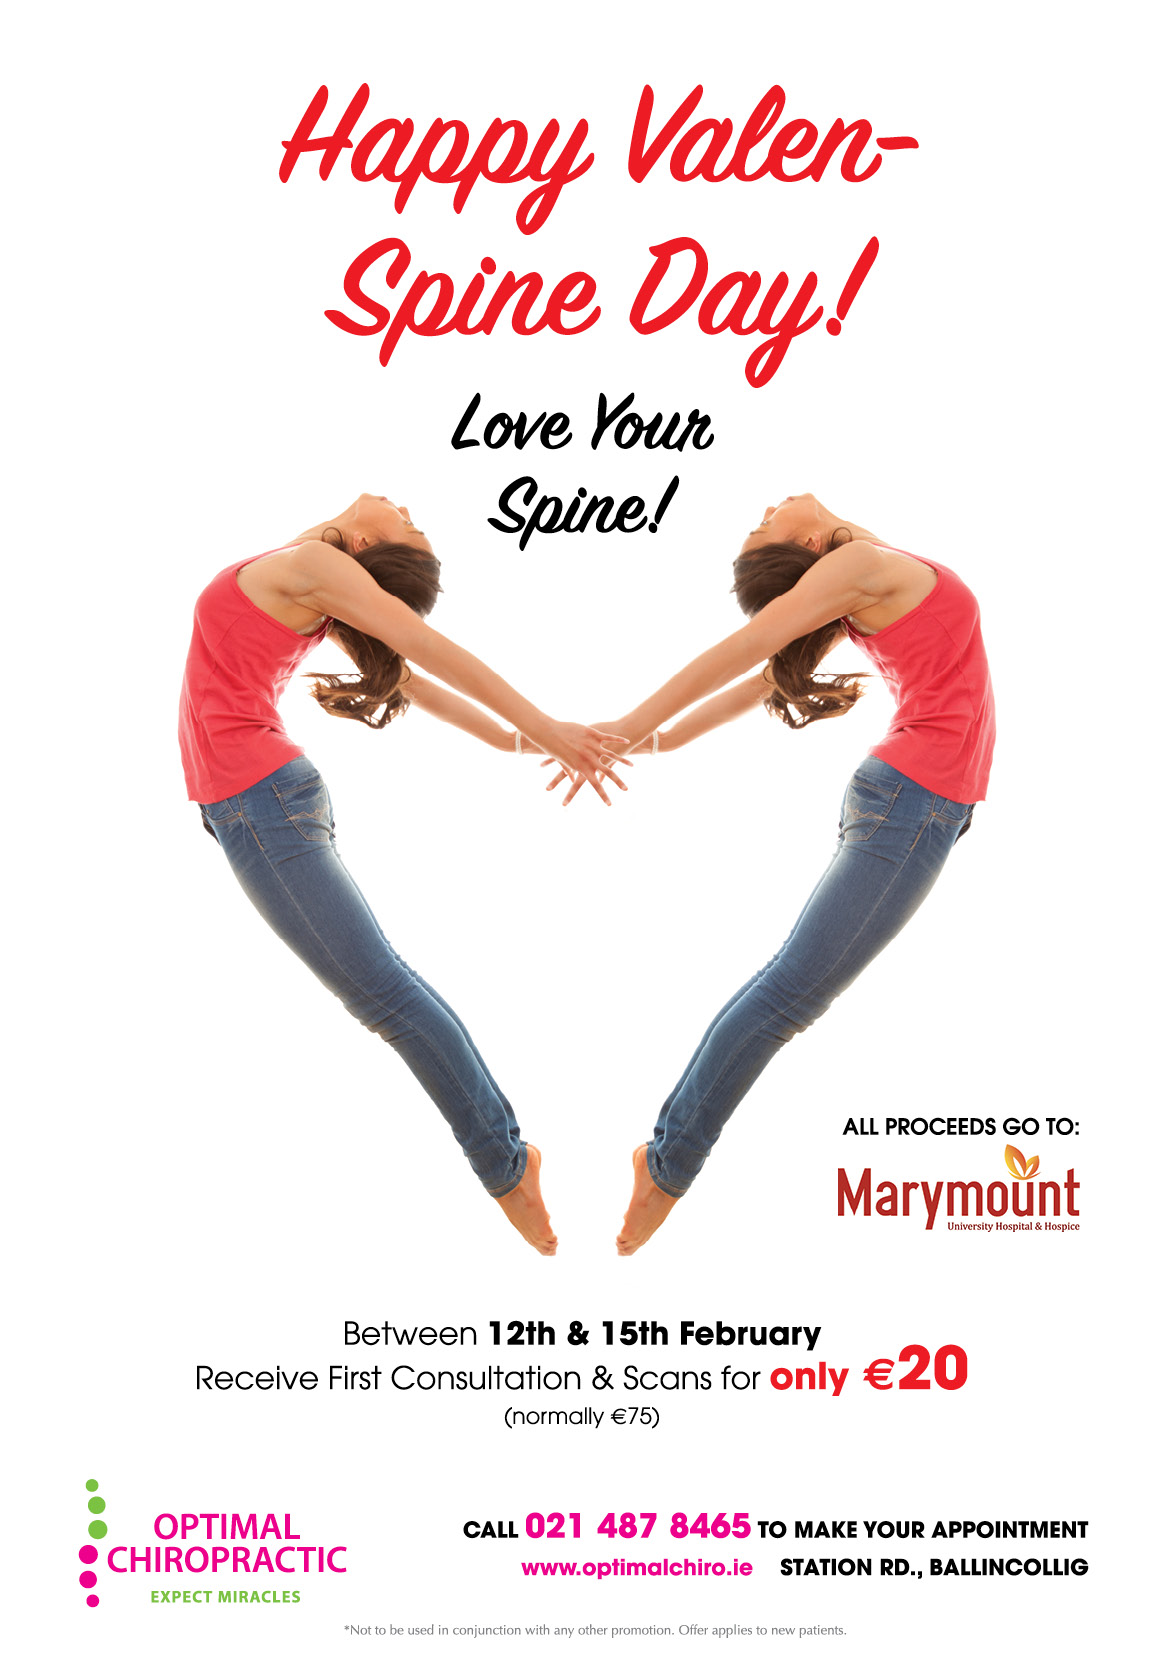 ValenSpine, Love Your Spine Promotion in aid of Marymount Hospice